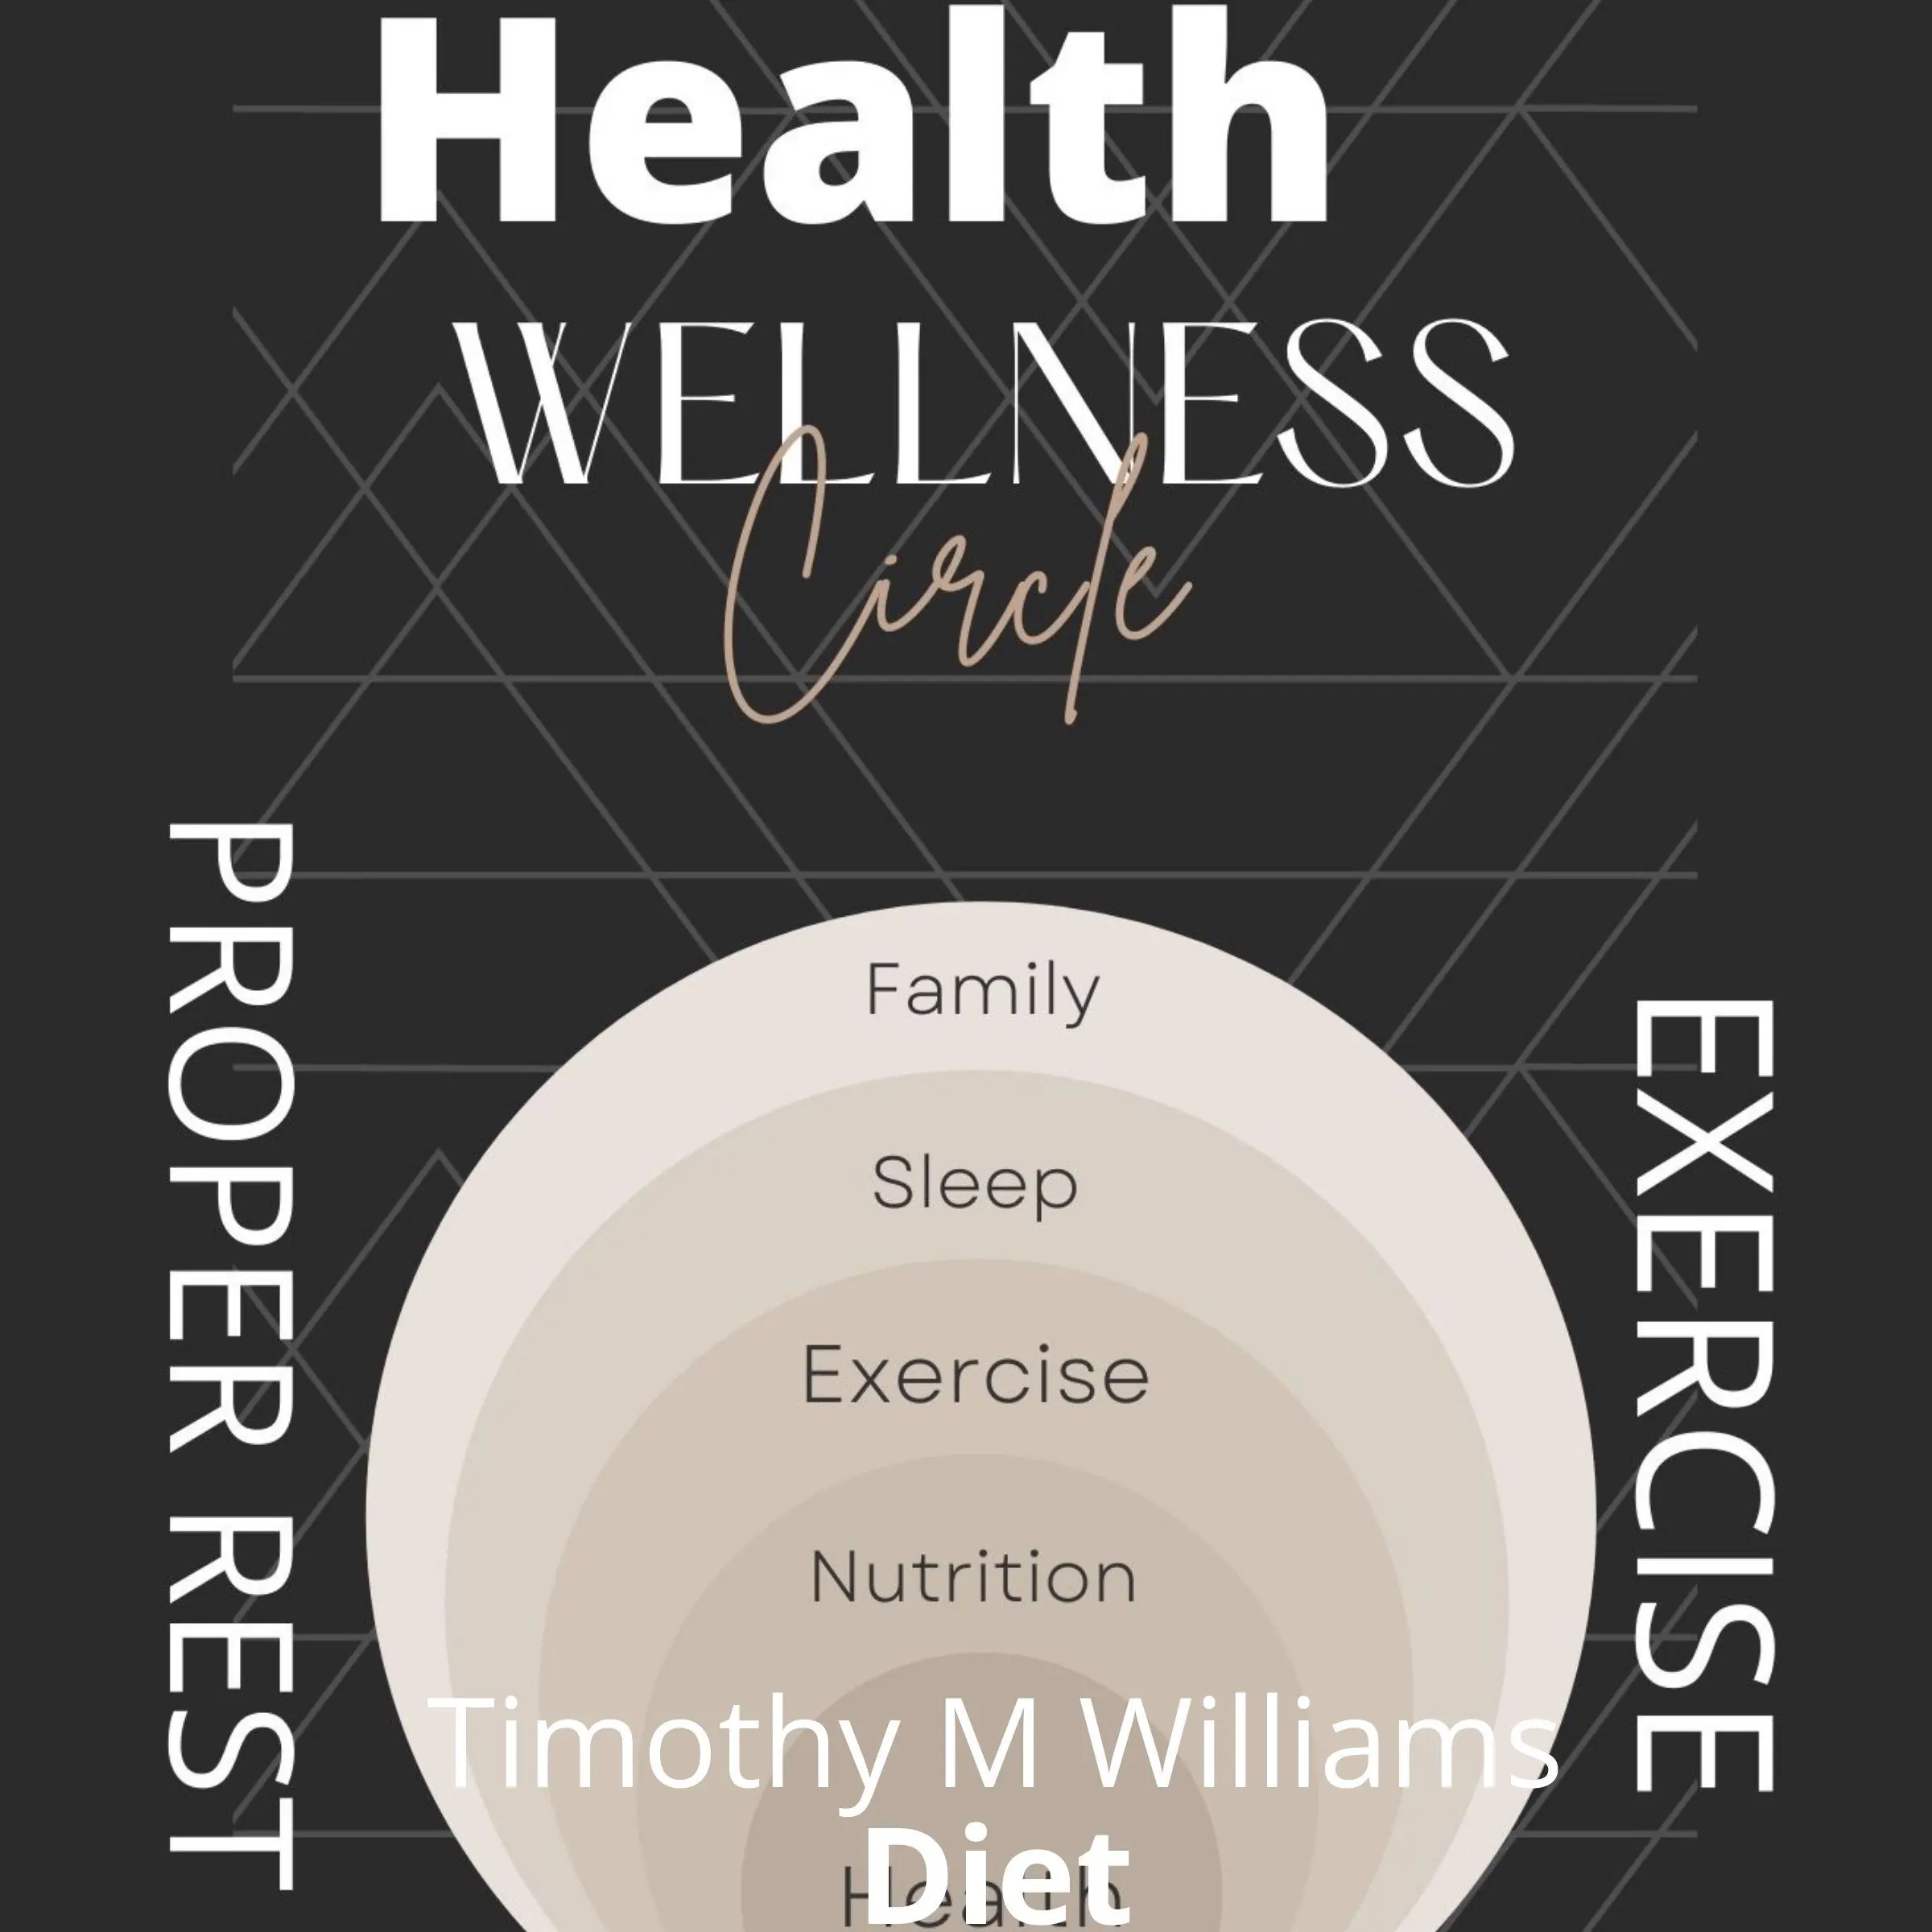 Health Wellness Exercise Proper Rest Diet Audiobook by Timothy Mario Williams